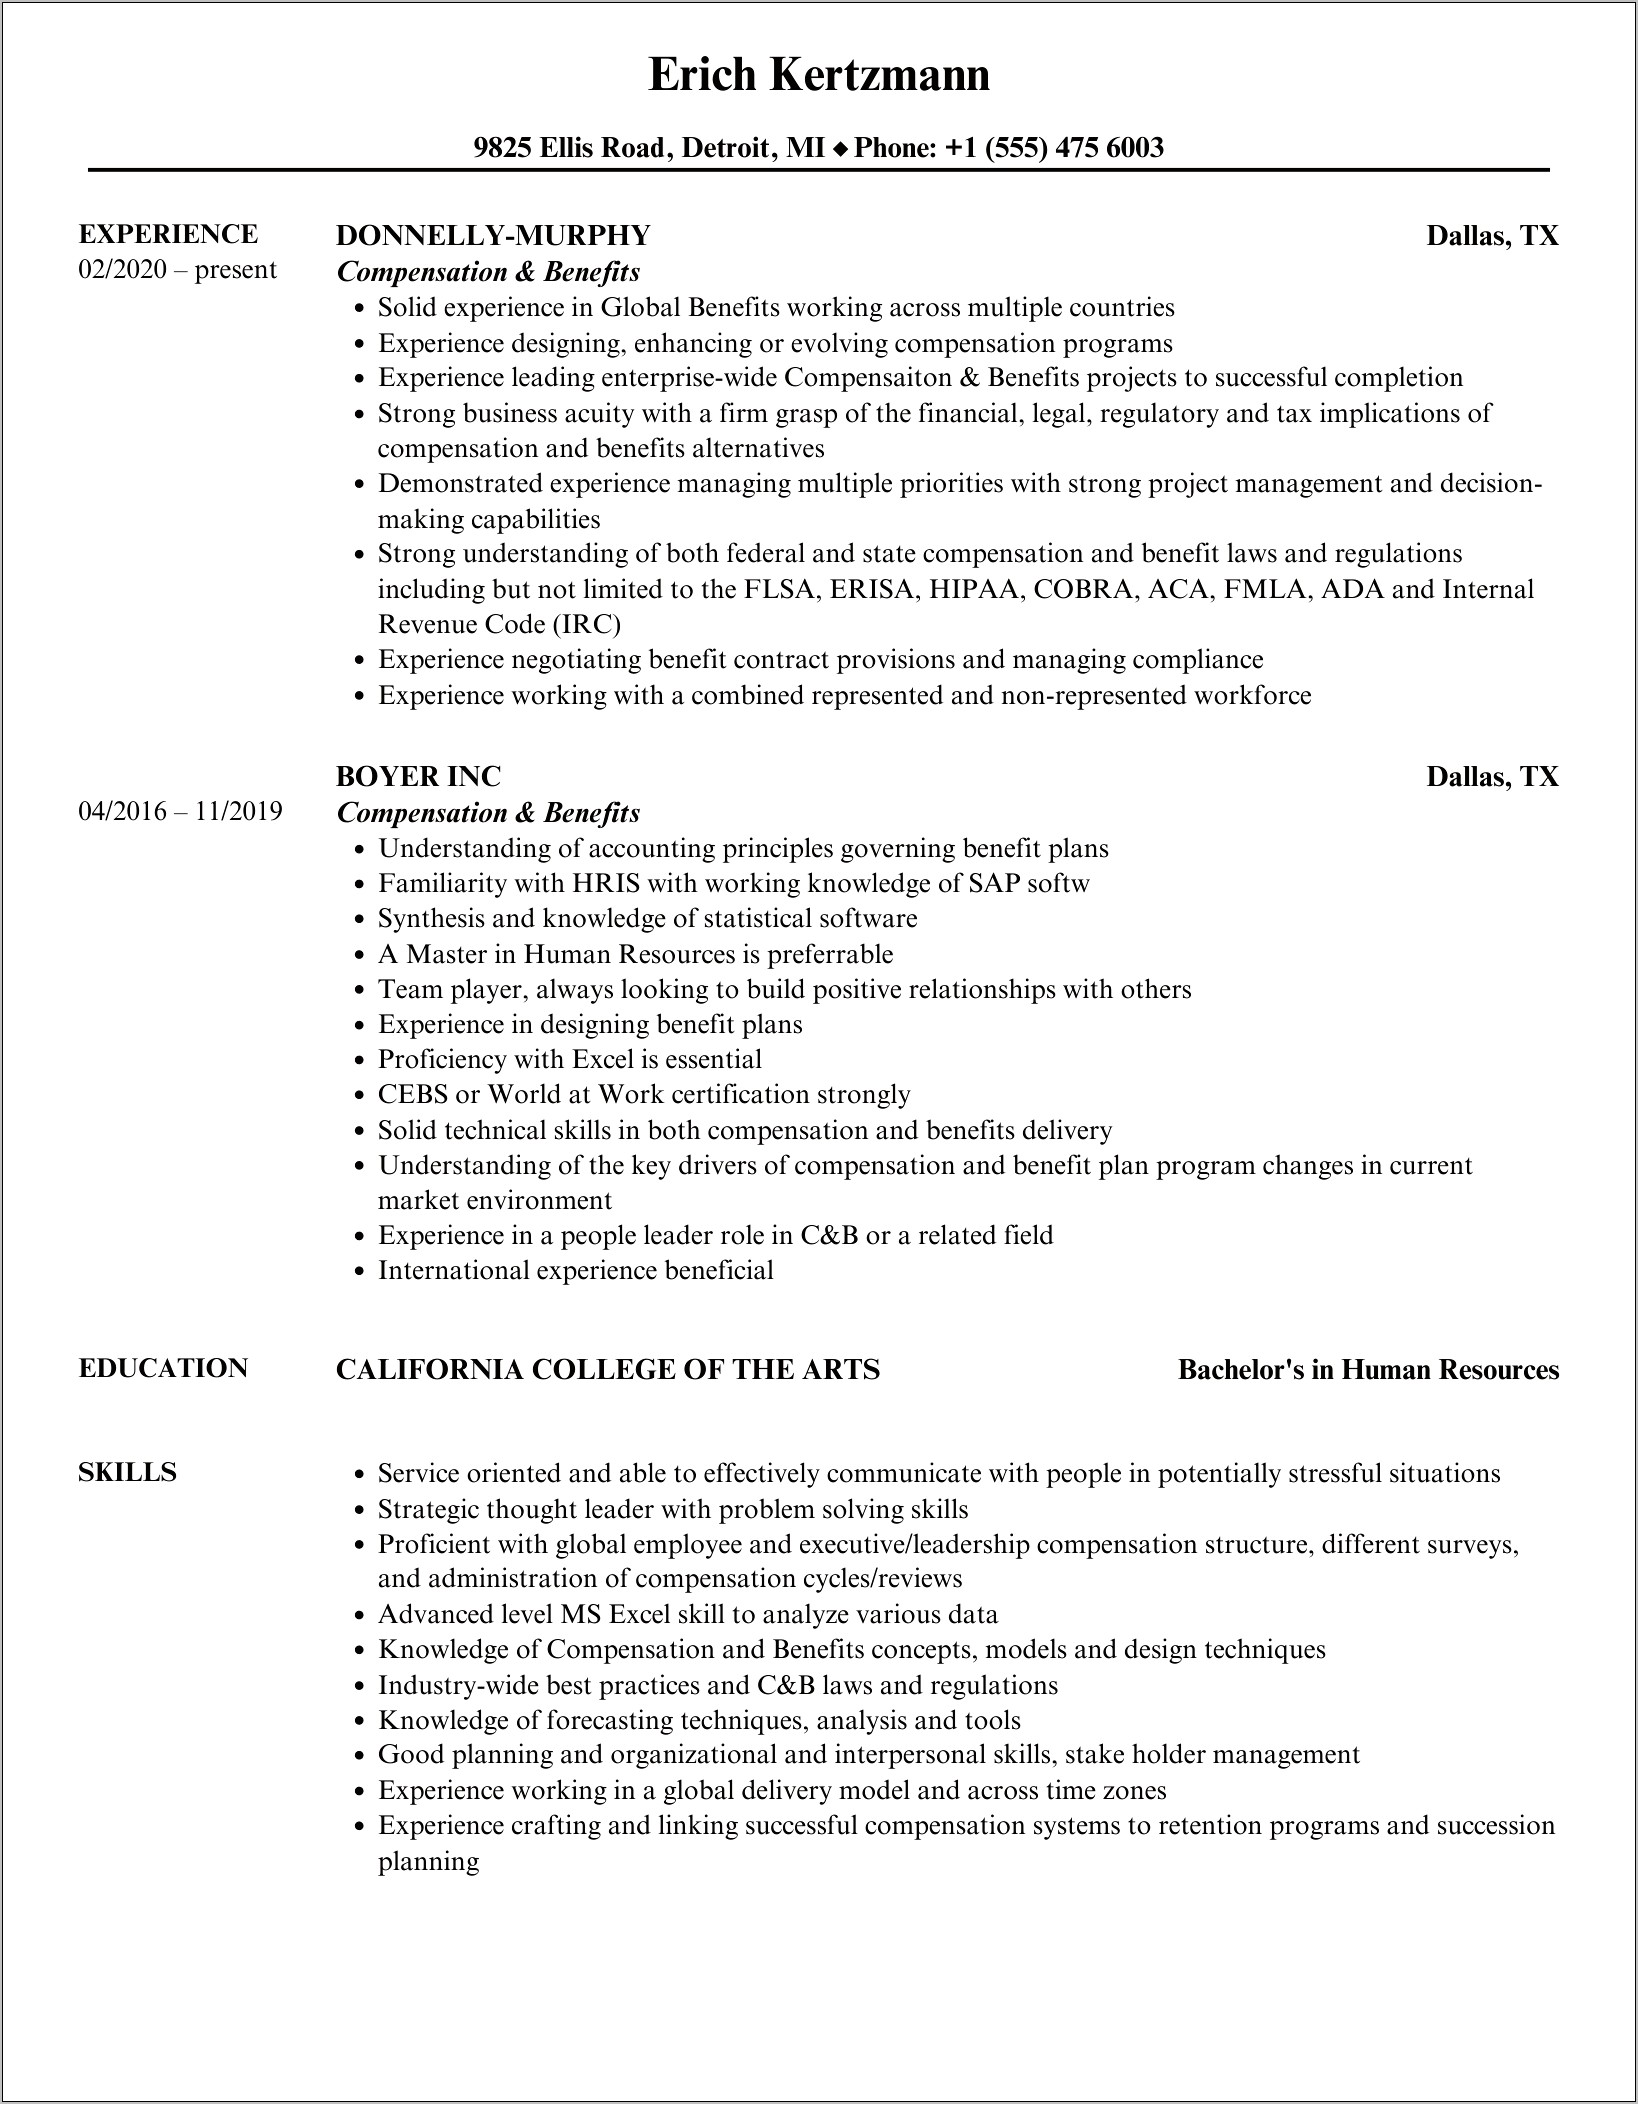 Sample Resume With Salary Expectations